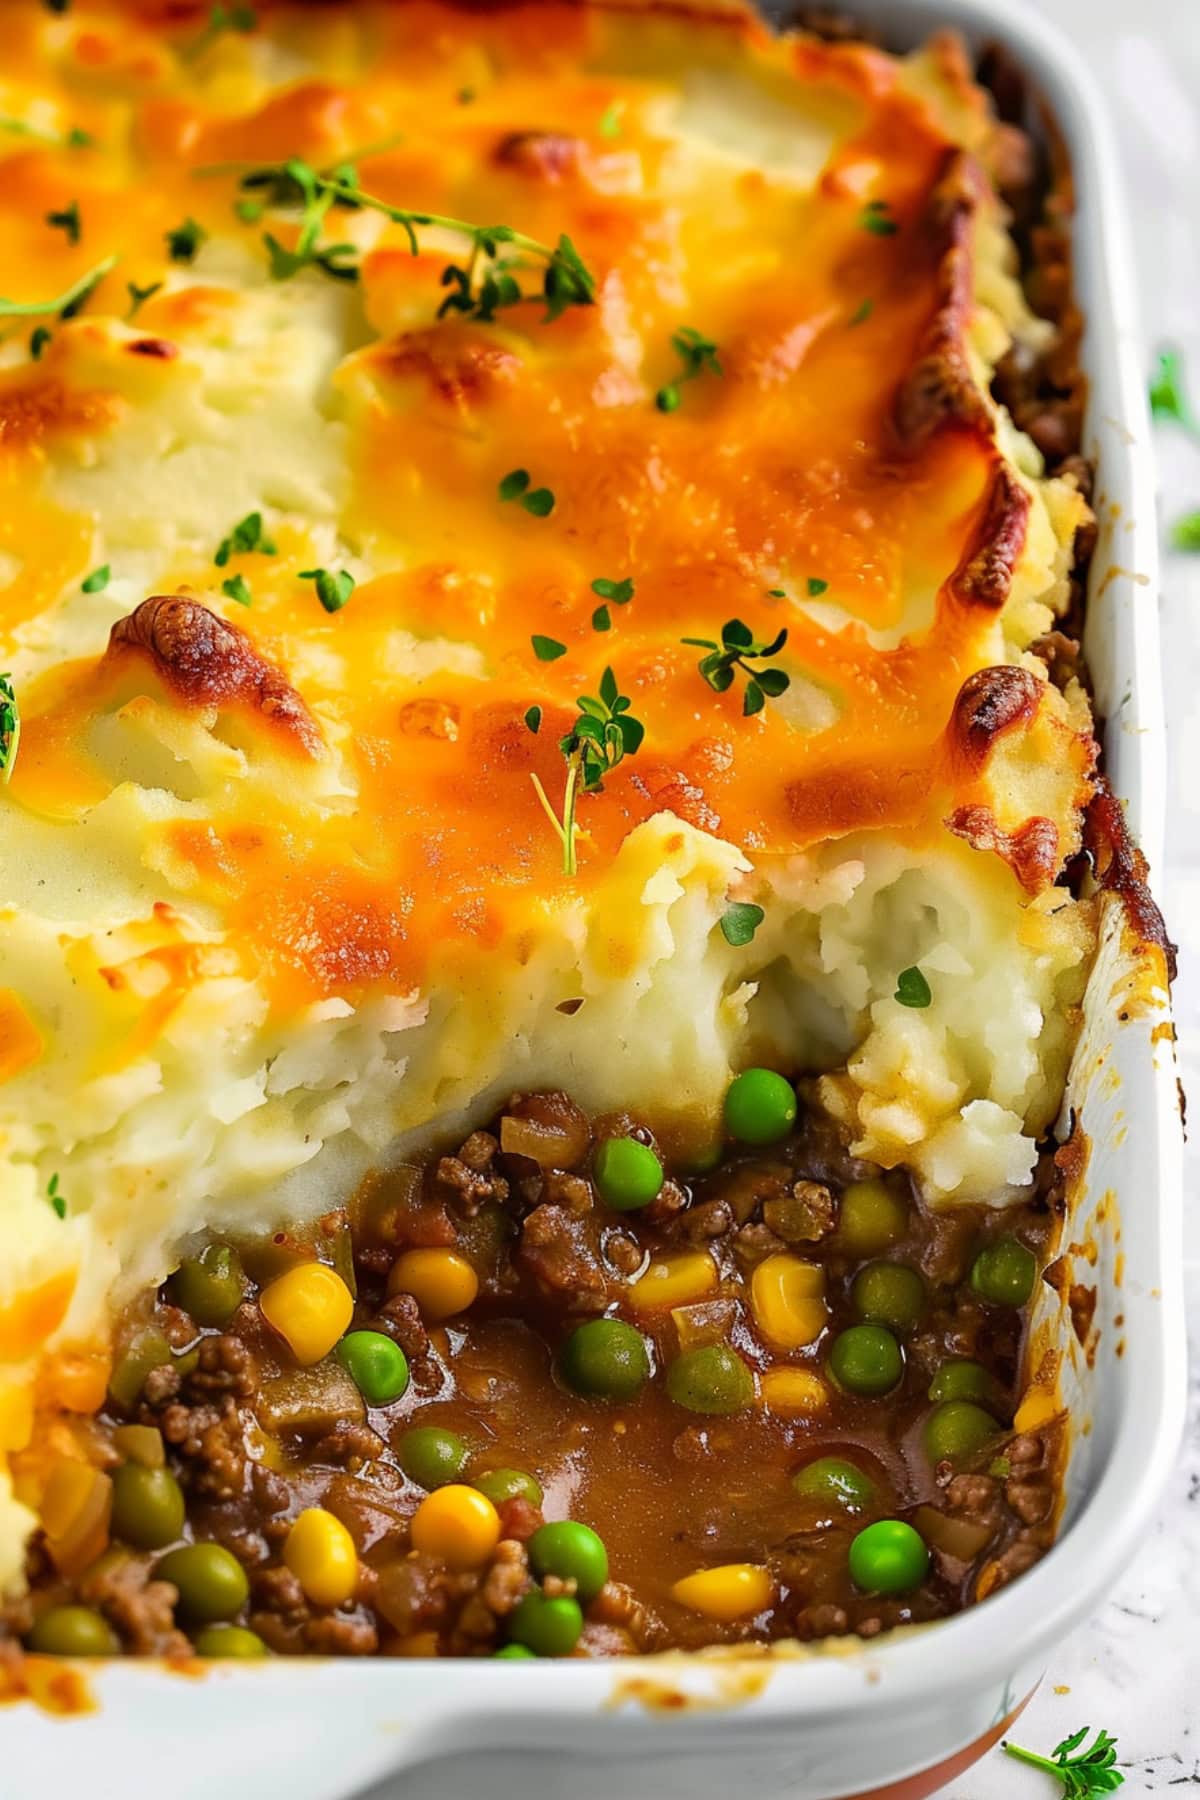 Shepherd's pie in a baking dish with green peas and corn kernels.